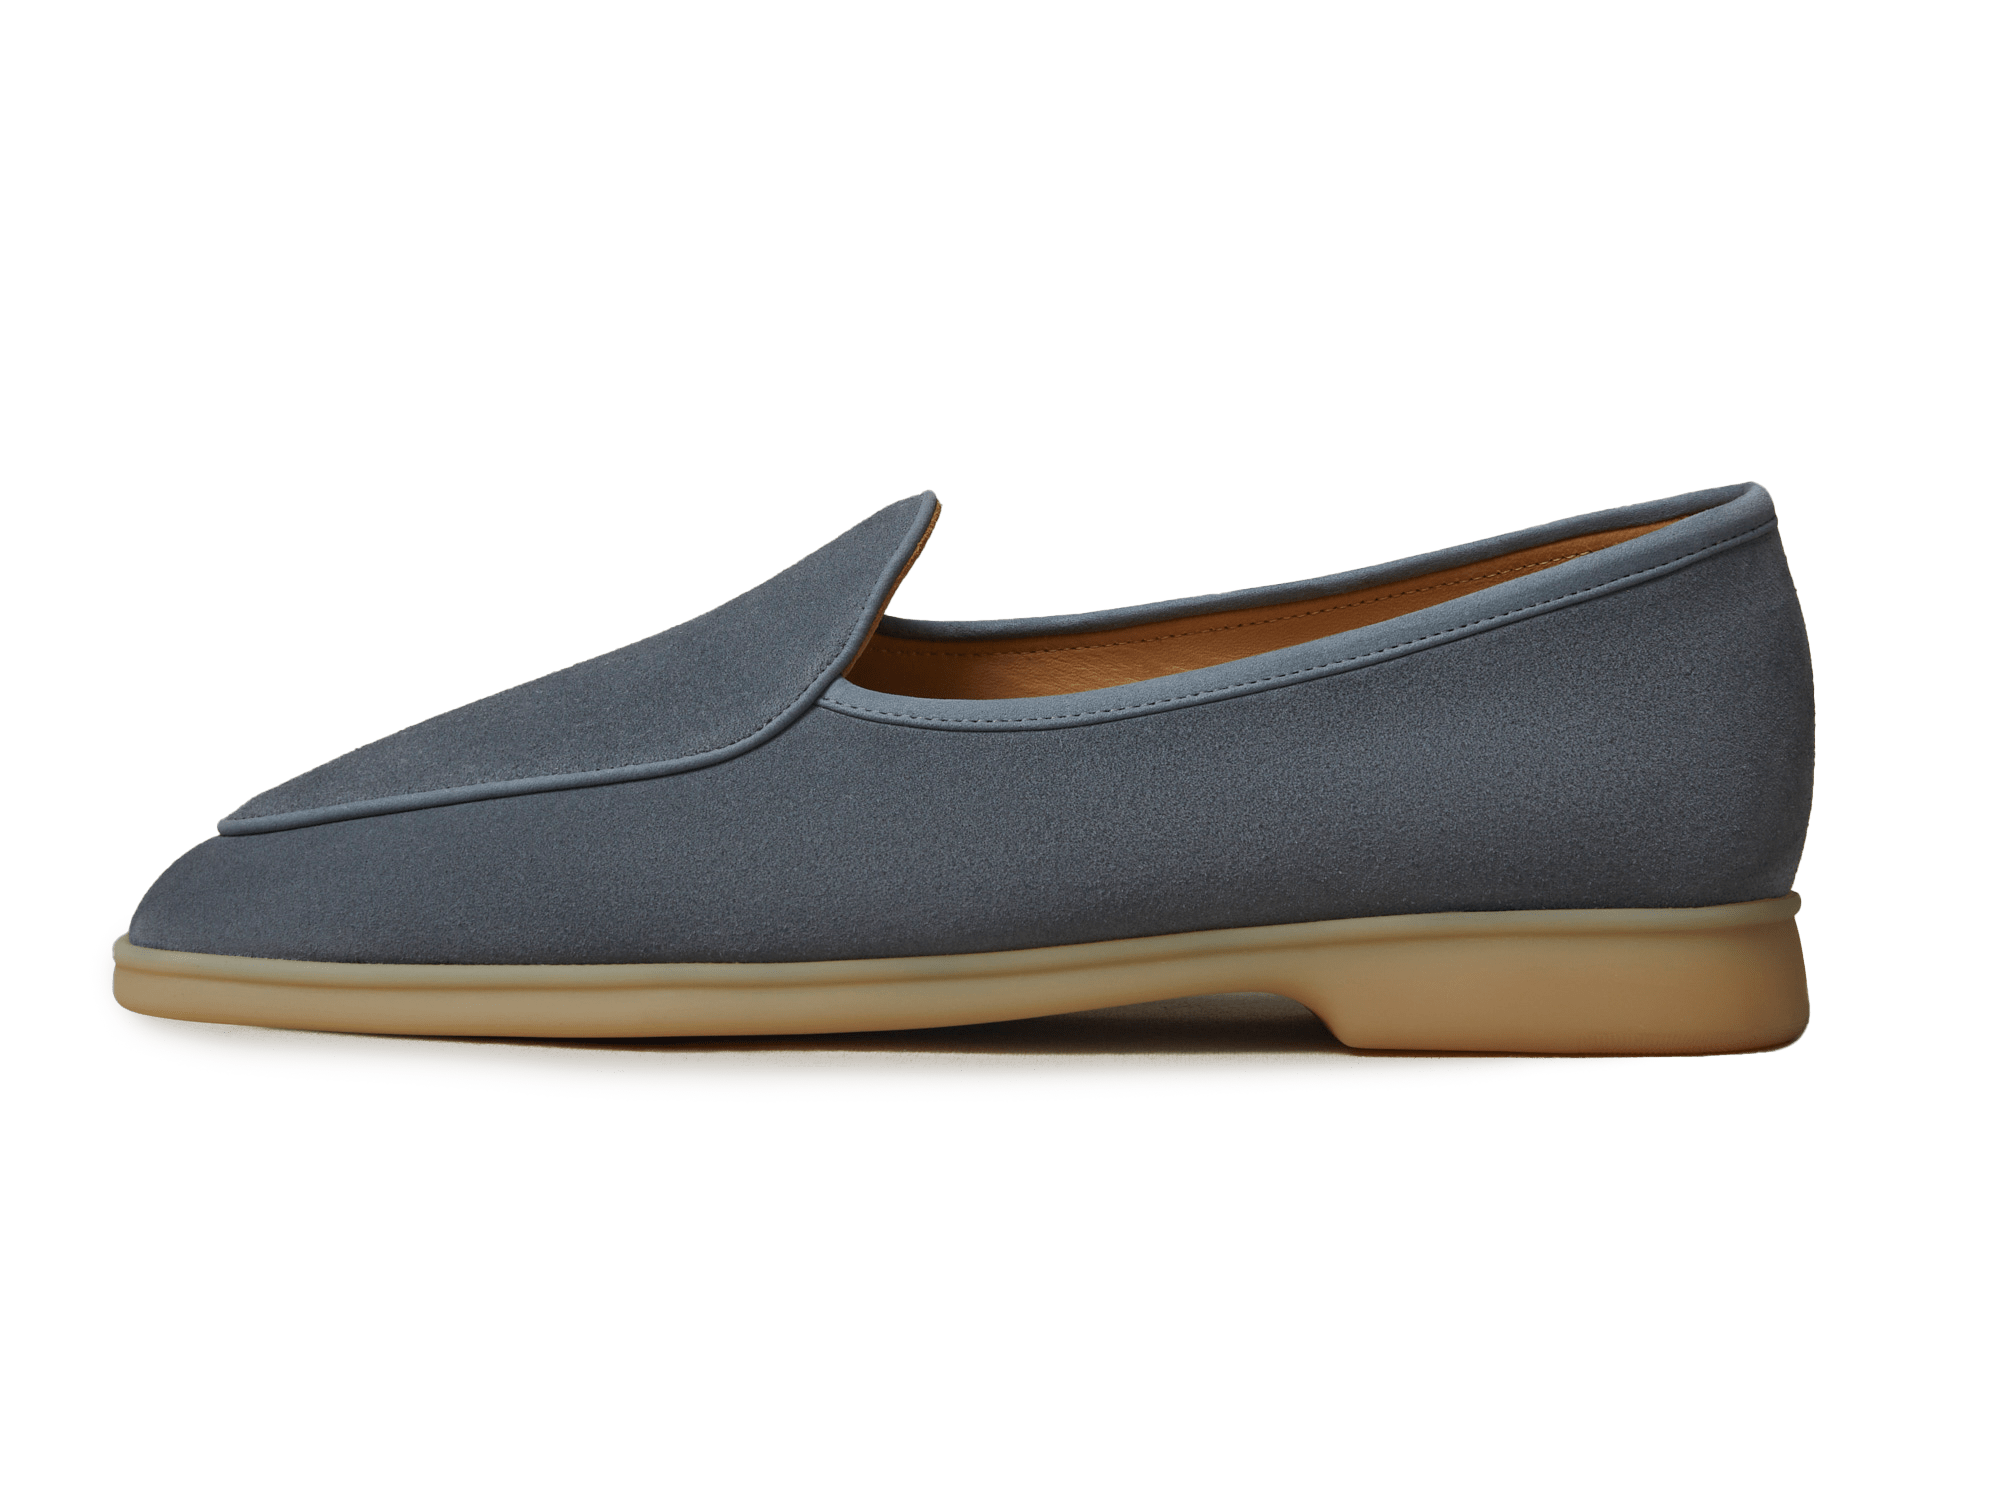 Stride Loafers in Thunder Blue Glove Suede with Natural Sole